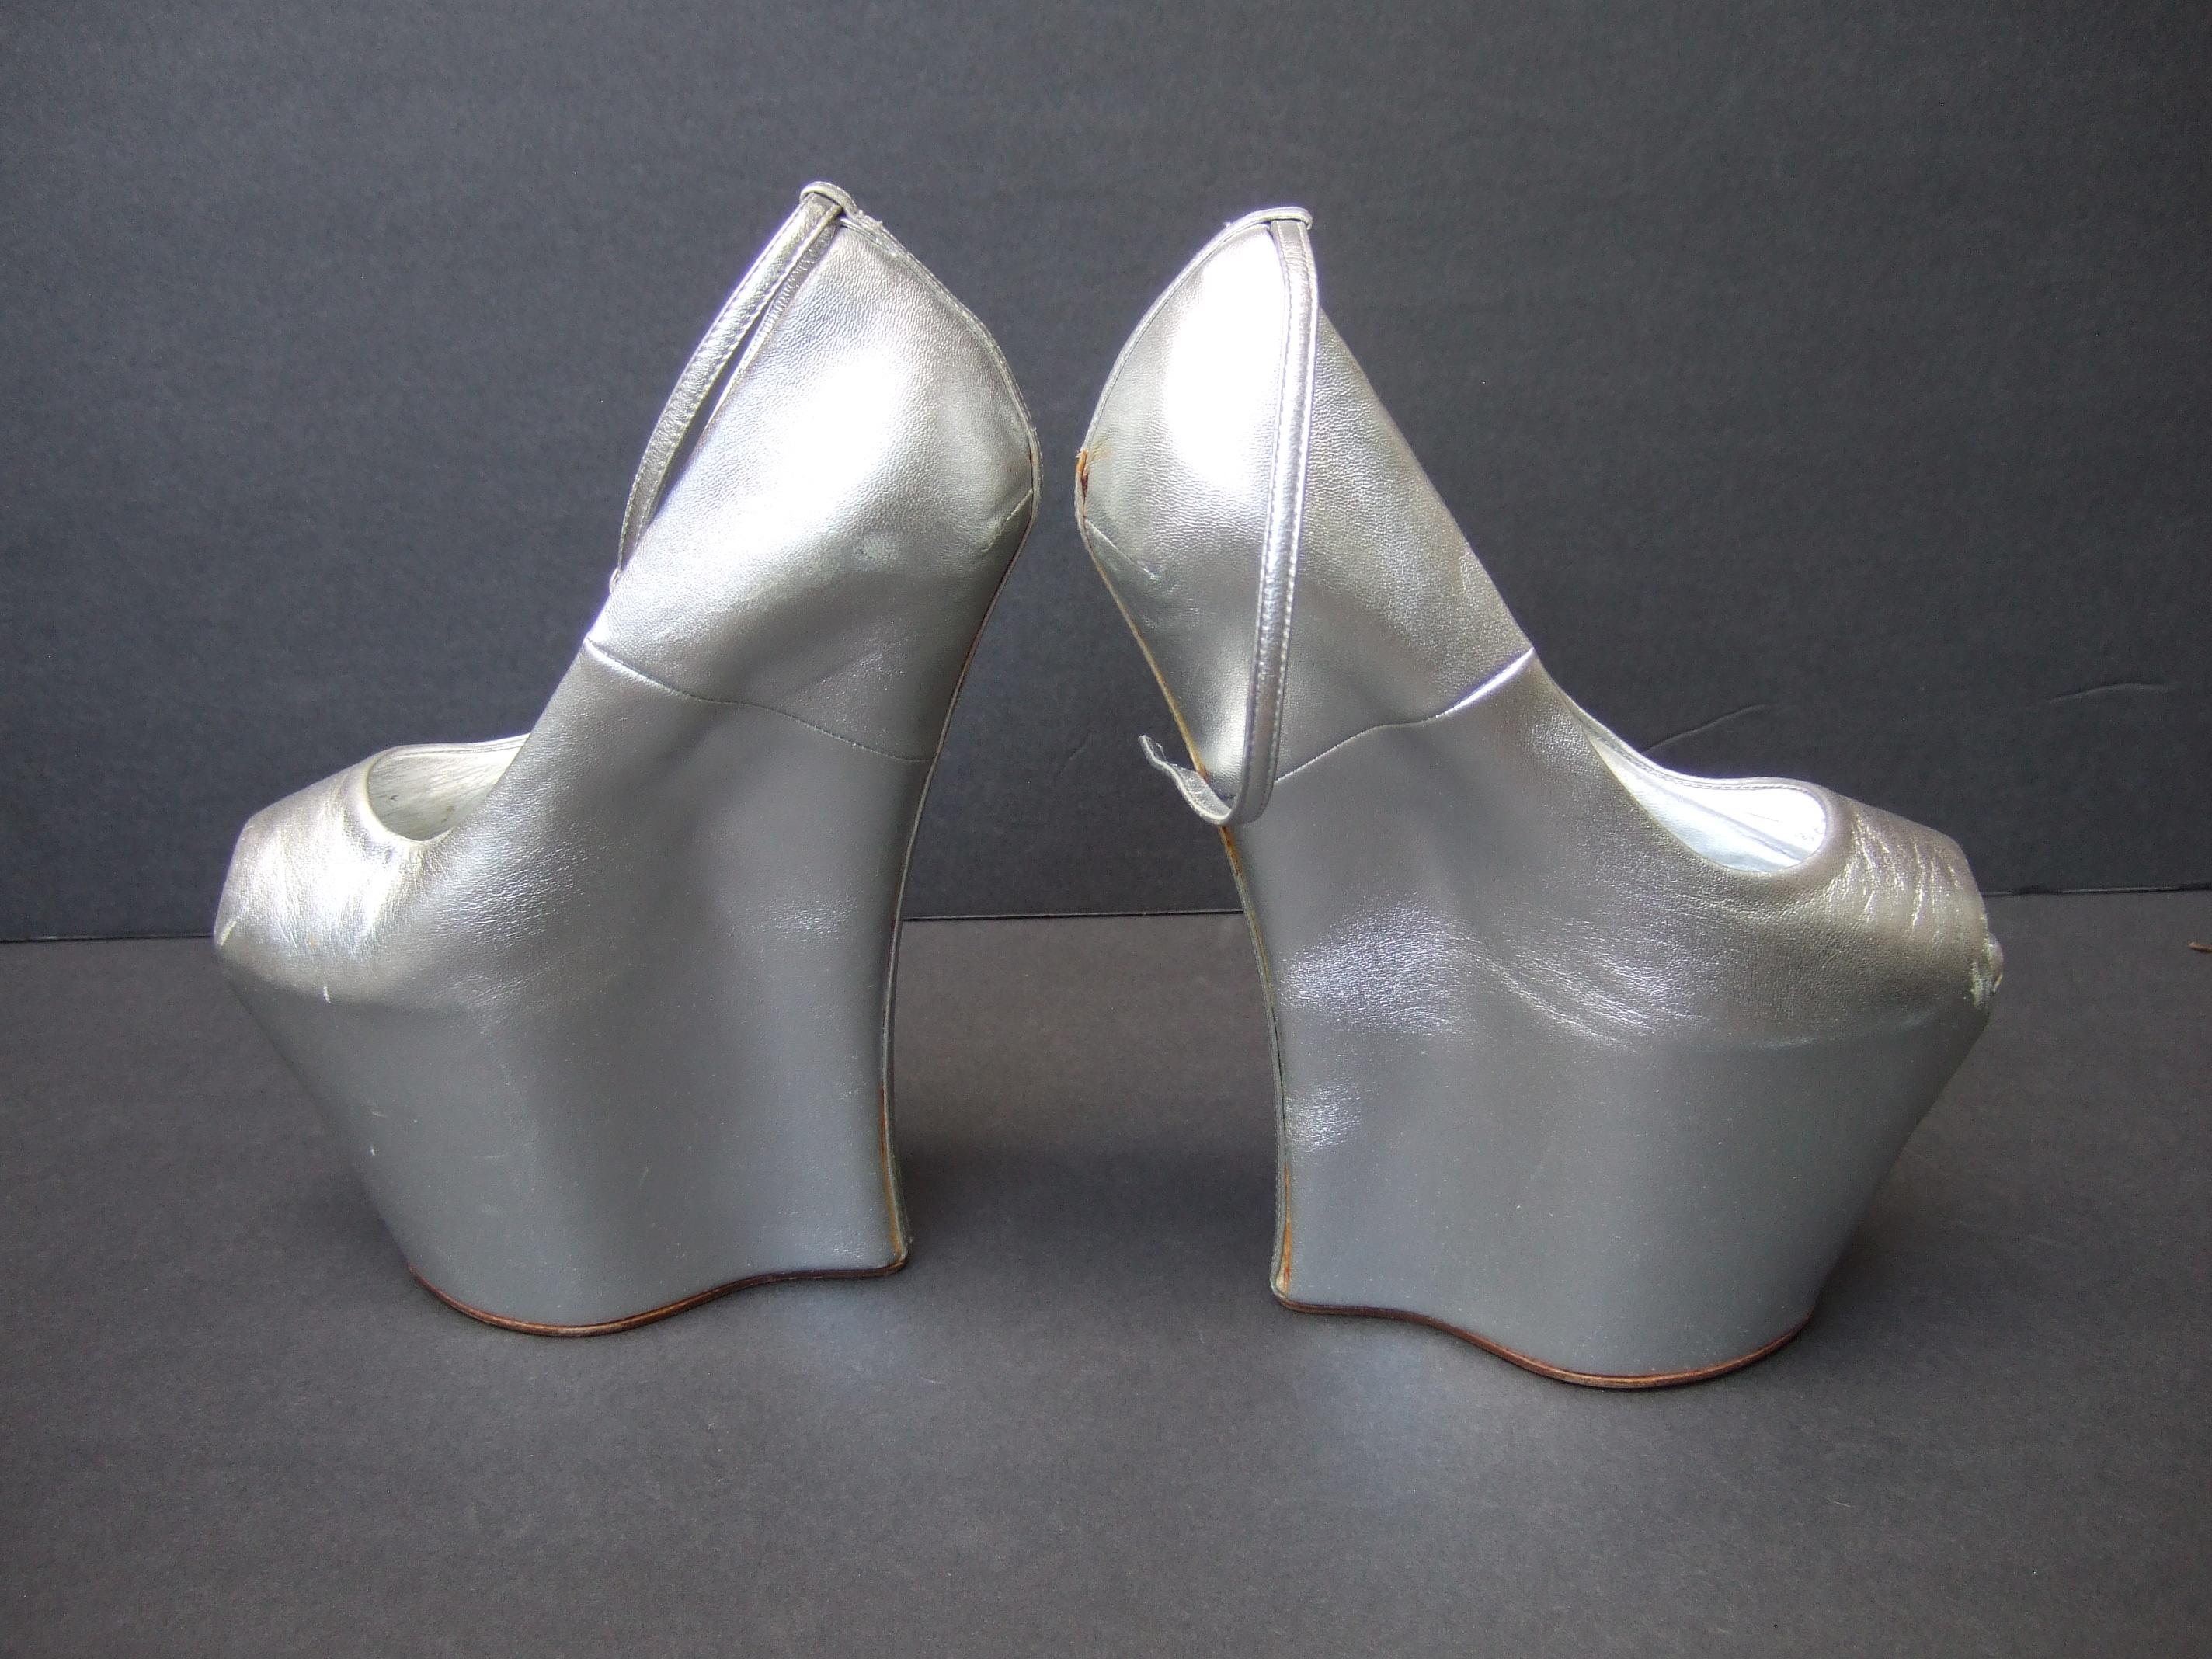 Giuseppe Zanotti Italian silver metallic leather avant-garde ankle strap peep toe platform shoes Size 36.5 in box
The edgy sky high ankle strap peep toe platform shoes are covered with silver metallic leather 
Makes a very dramatic eye-catching